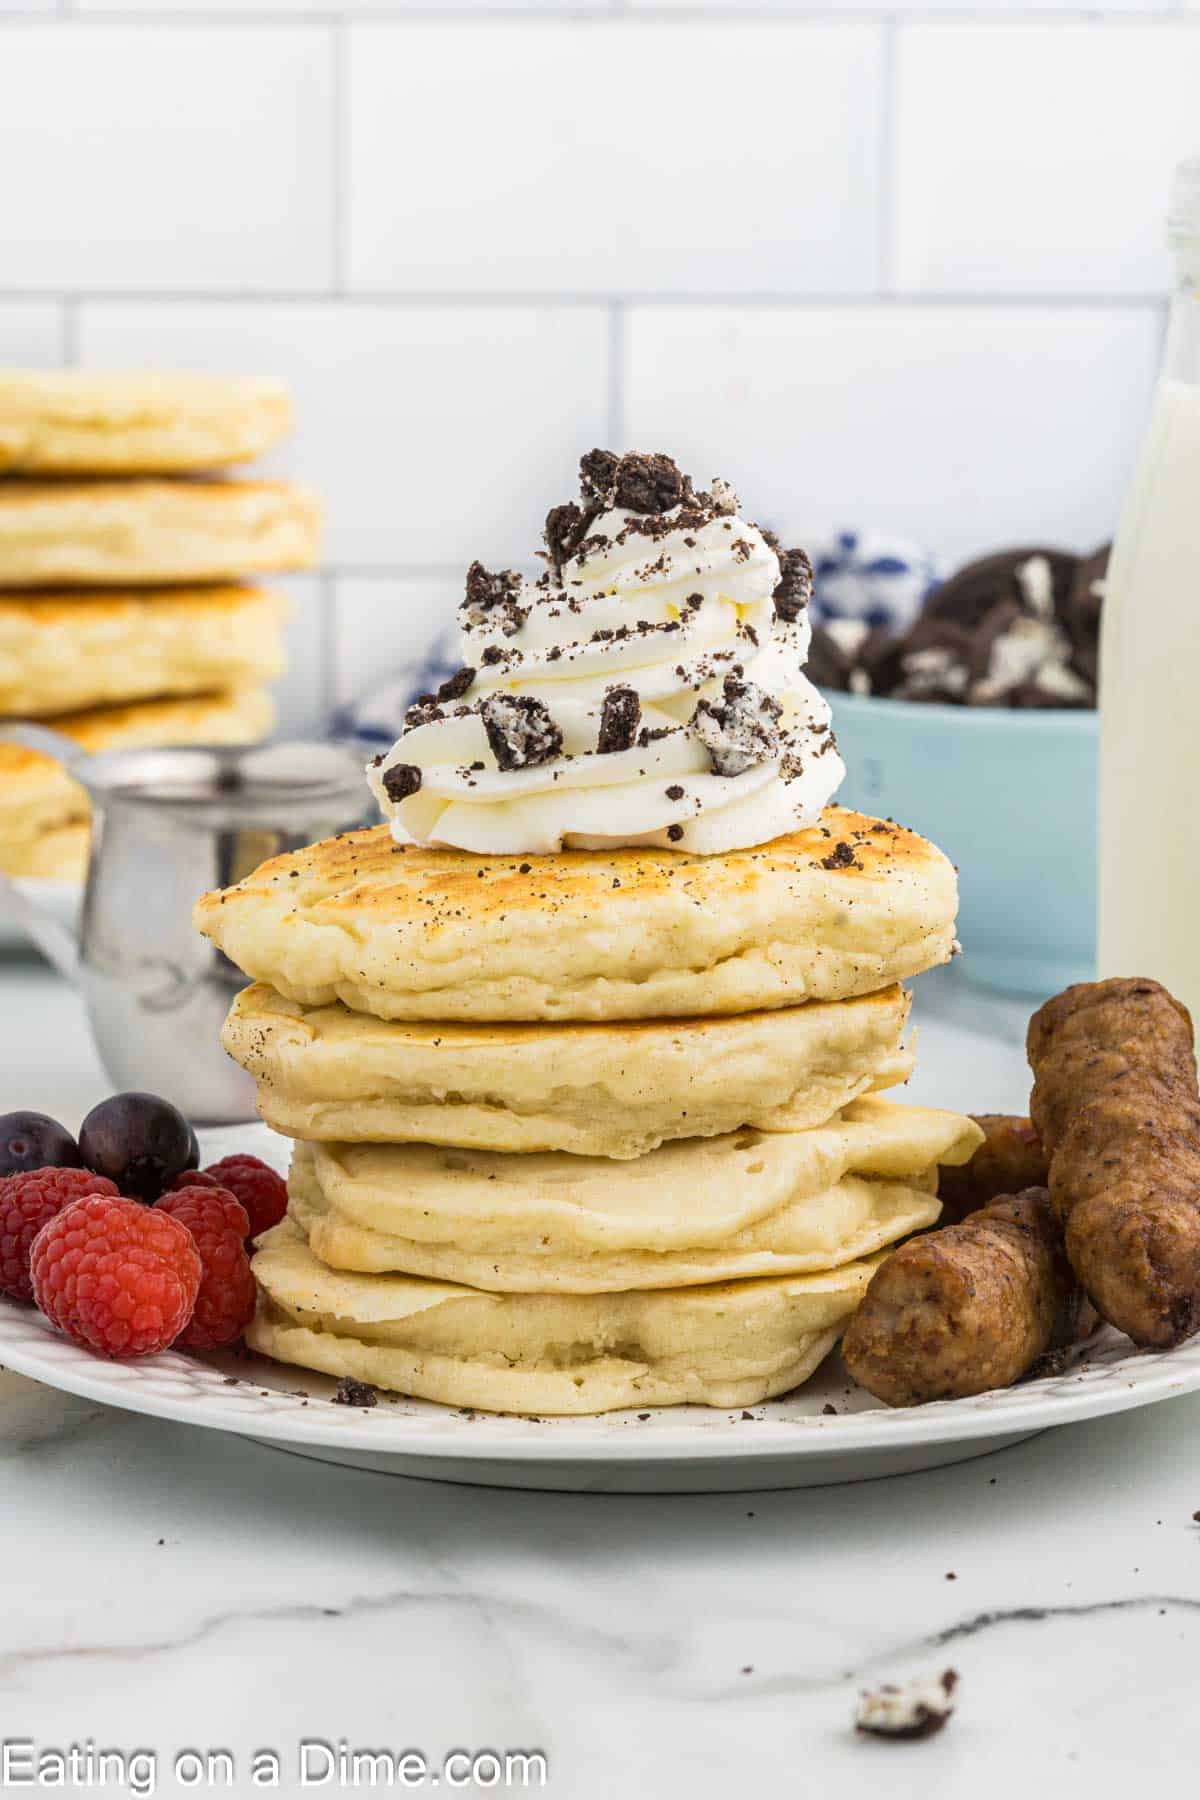 Oreo Pancakes stacked on a plate with a side of sausage links, fresh raspberries and grapes topped with whipped cream and crushed Oreos